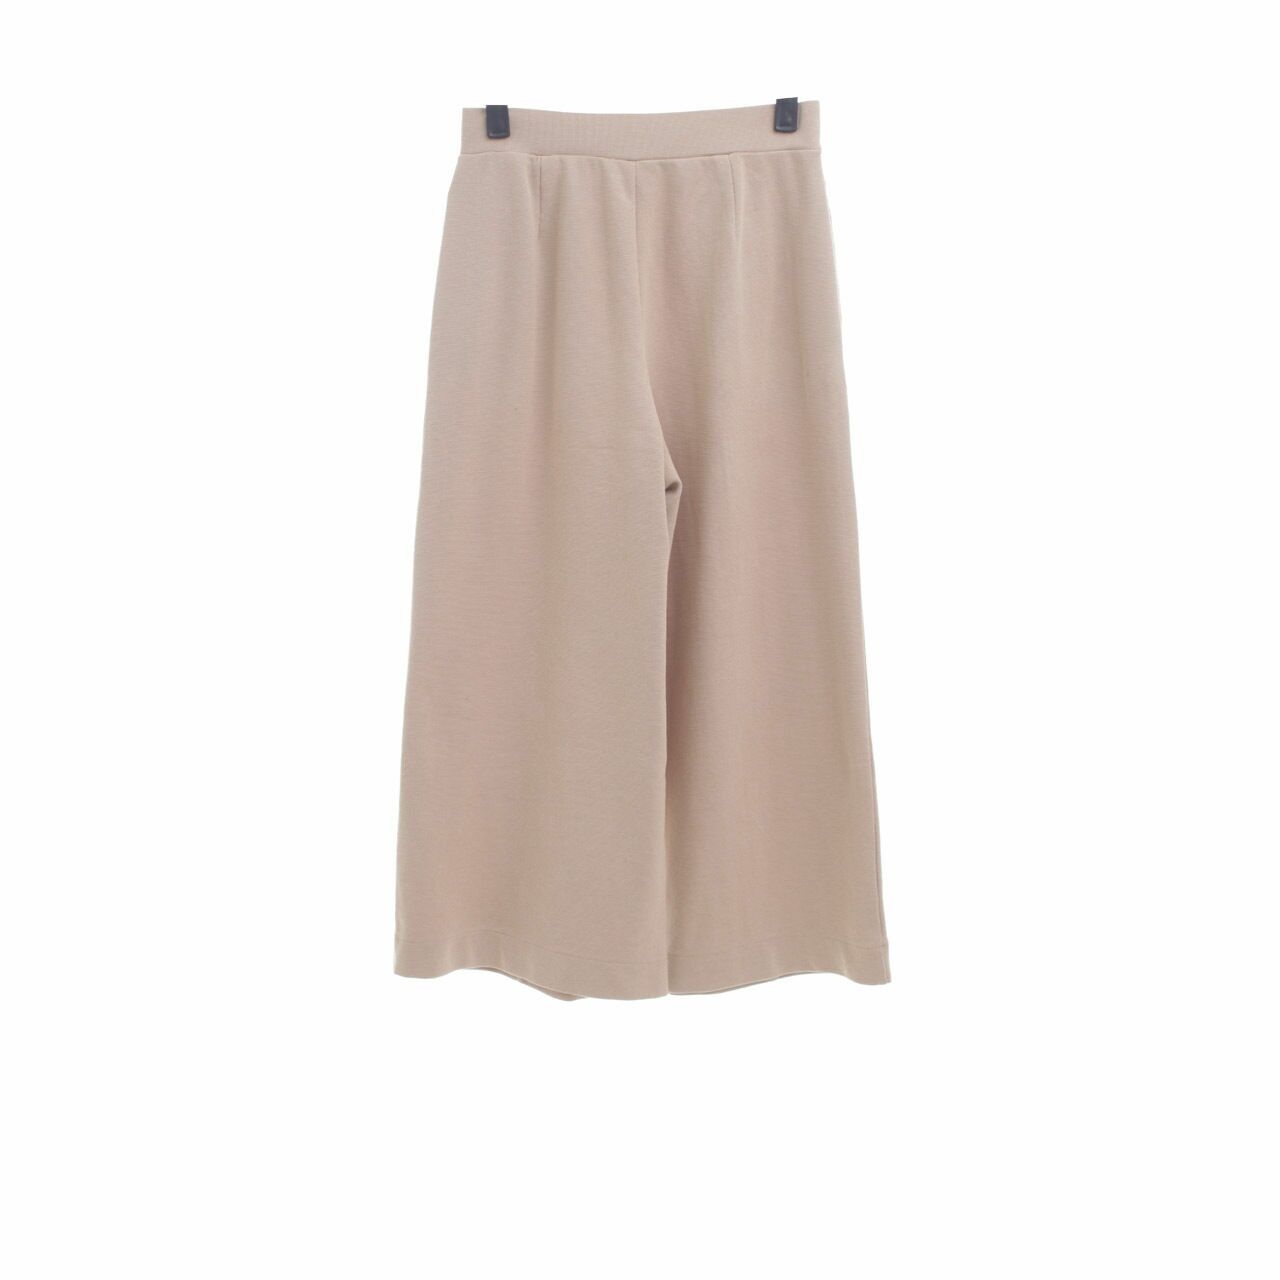 UNIQLO Light Brown Cullotes Long Pants